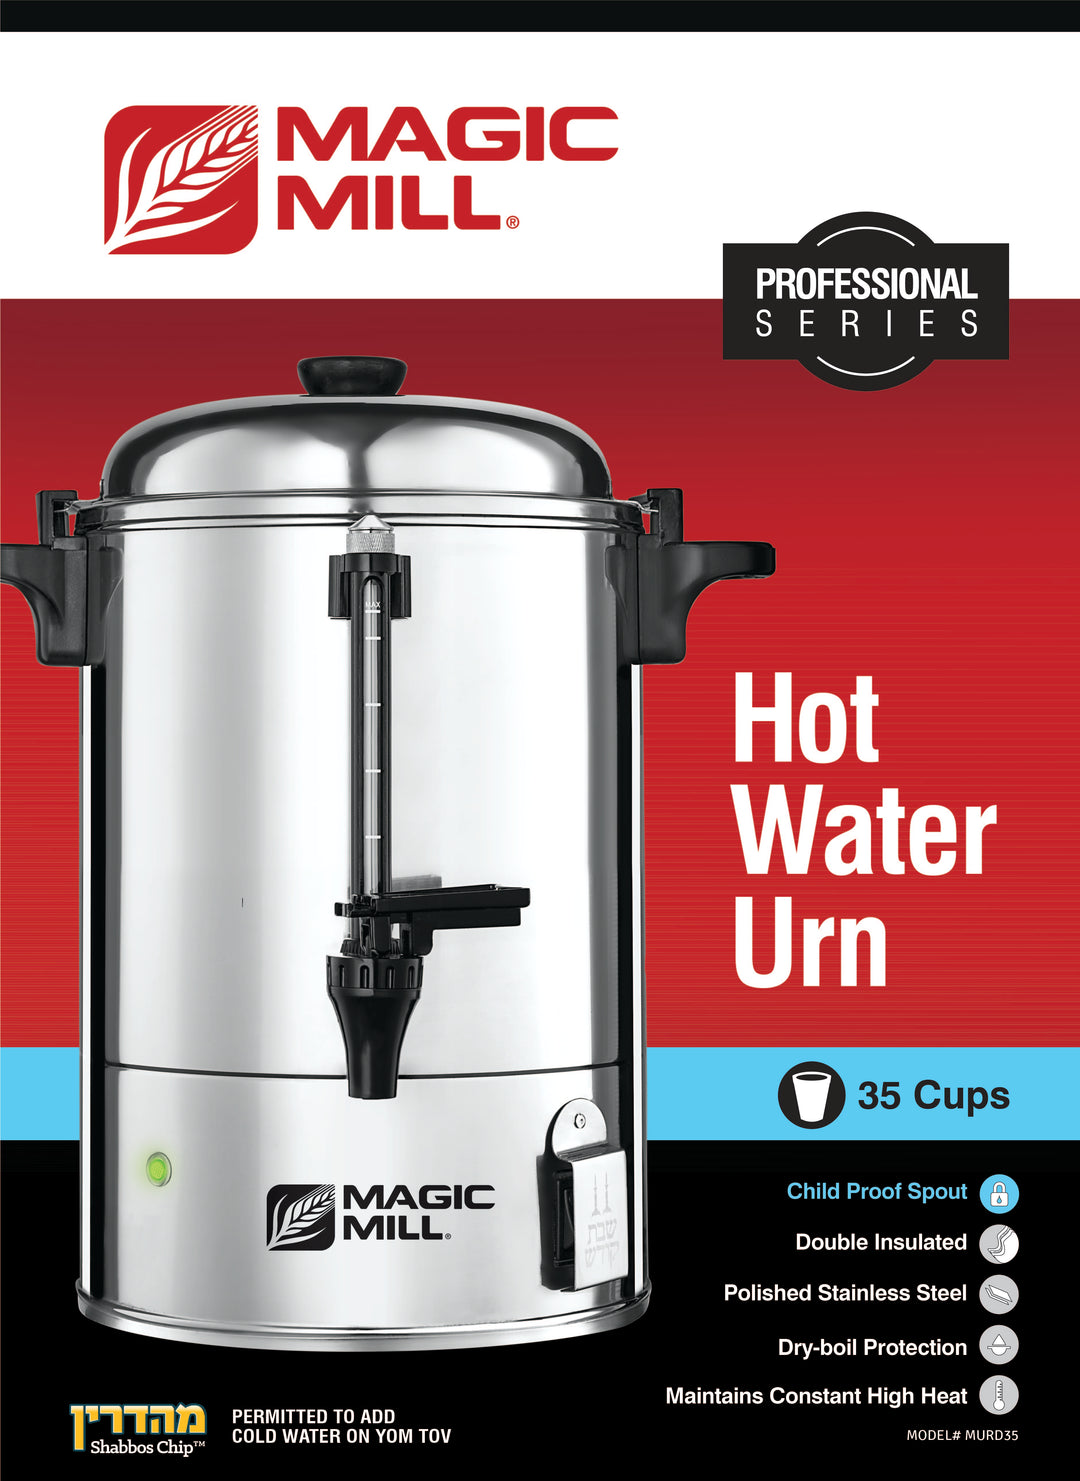 MAGIC MILL DOUBLE INSULATED HOT WATER URN 35 CUP SAFETY SPOUT MODEL# MURD35